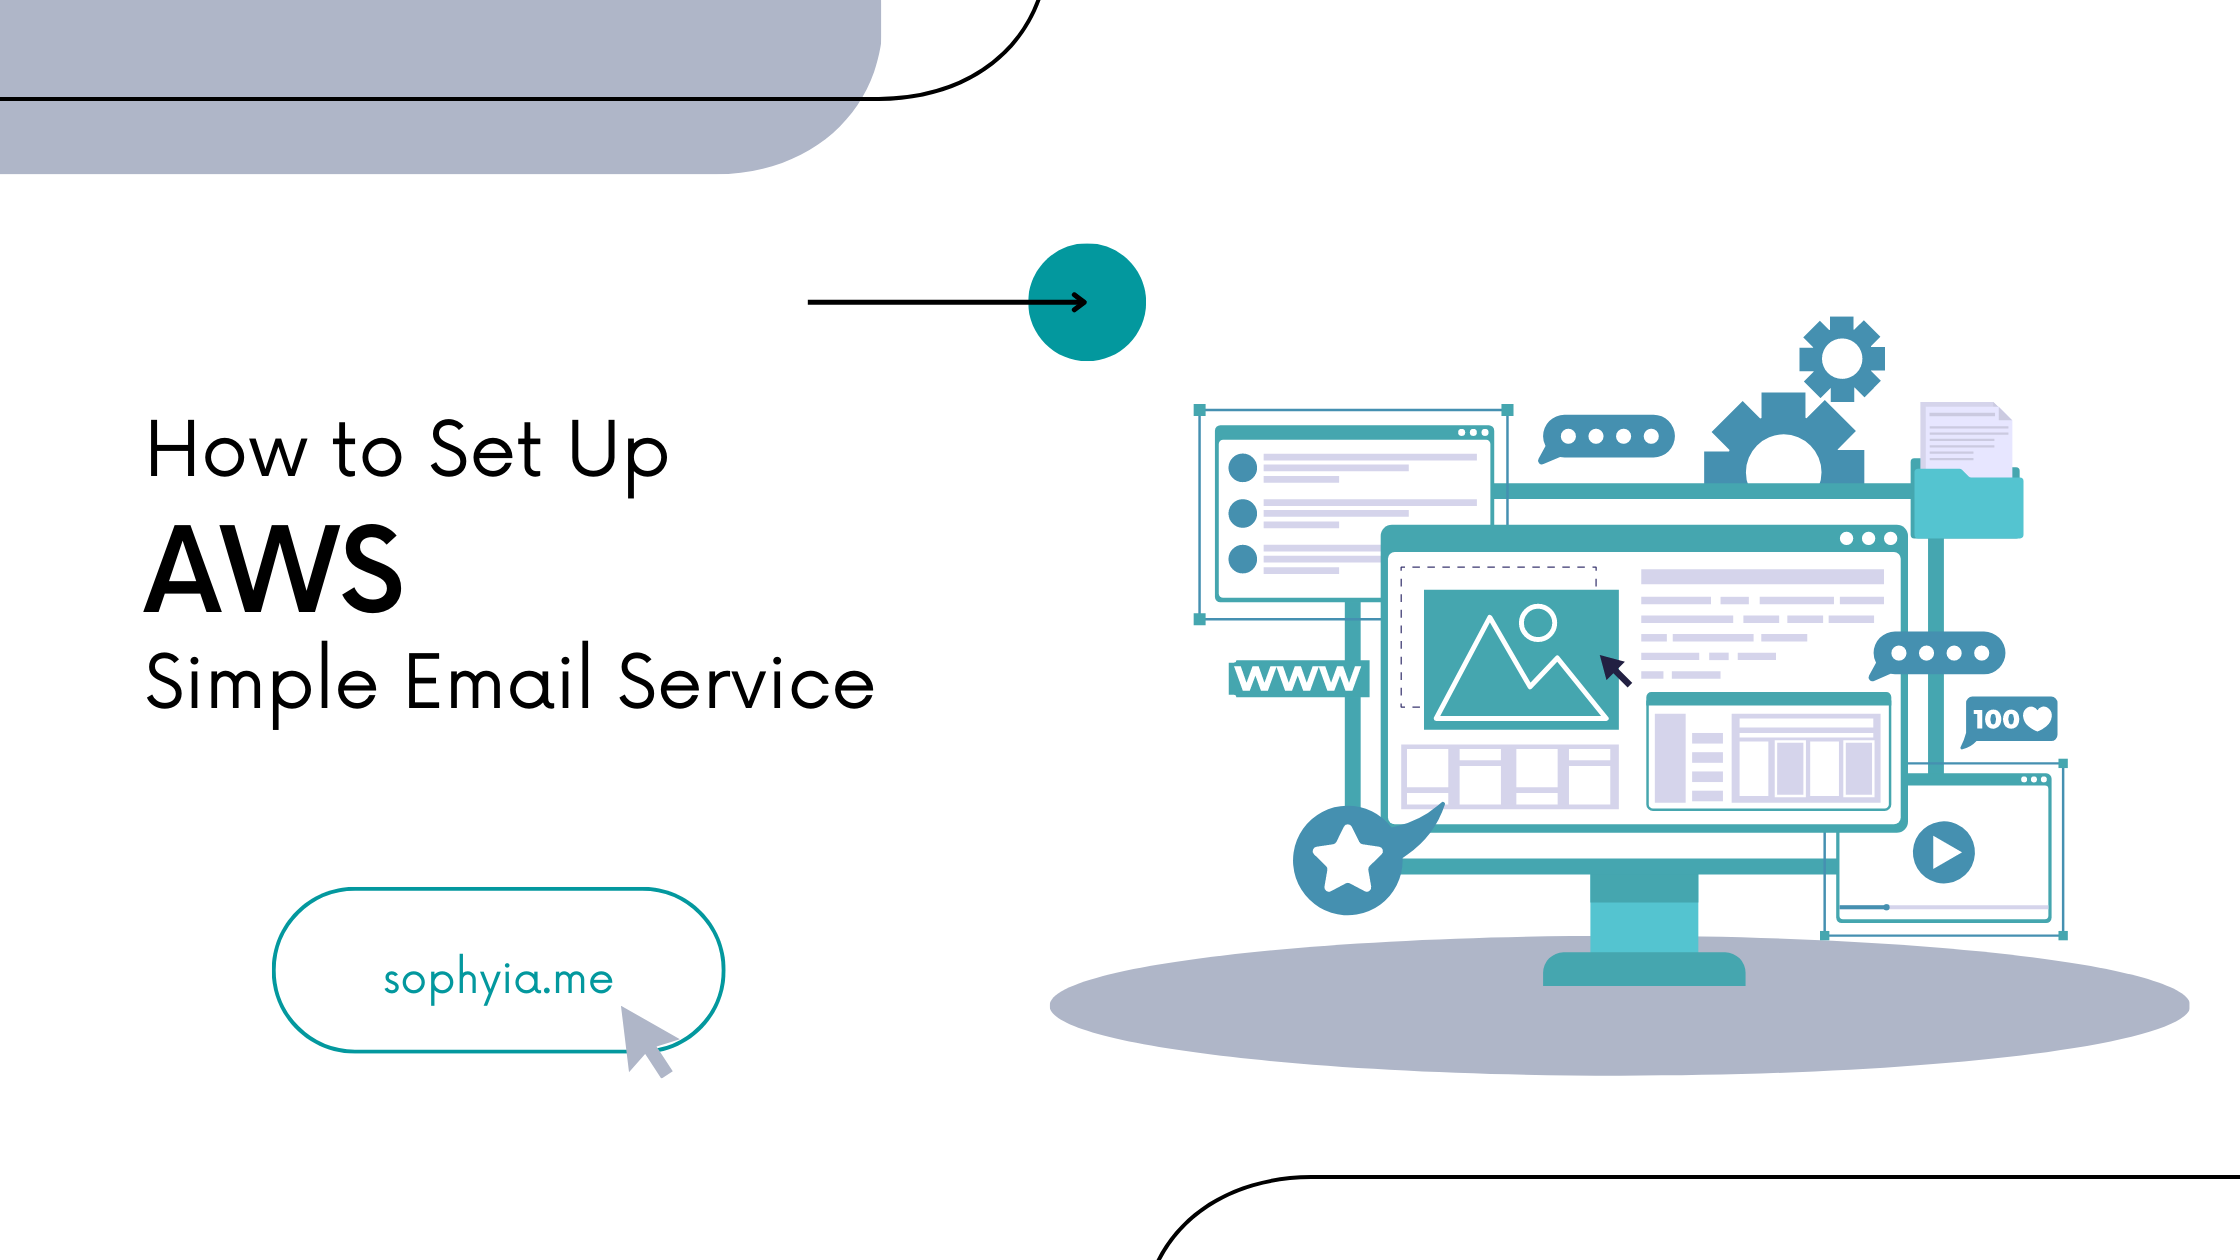 Simple Email Service (SES)